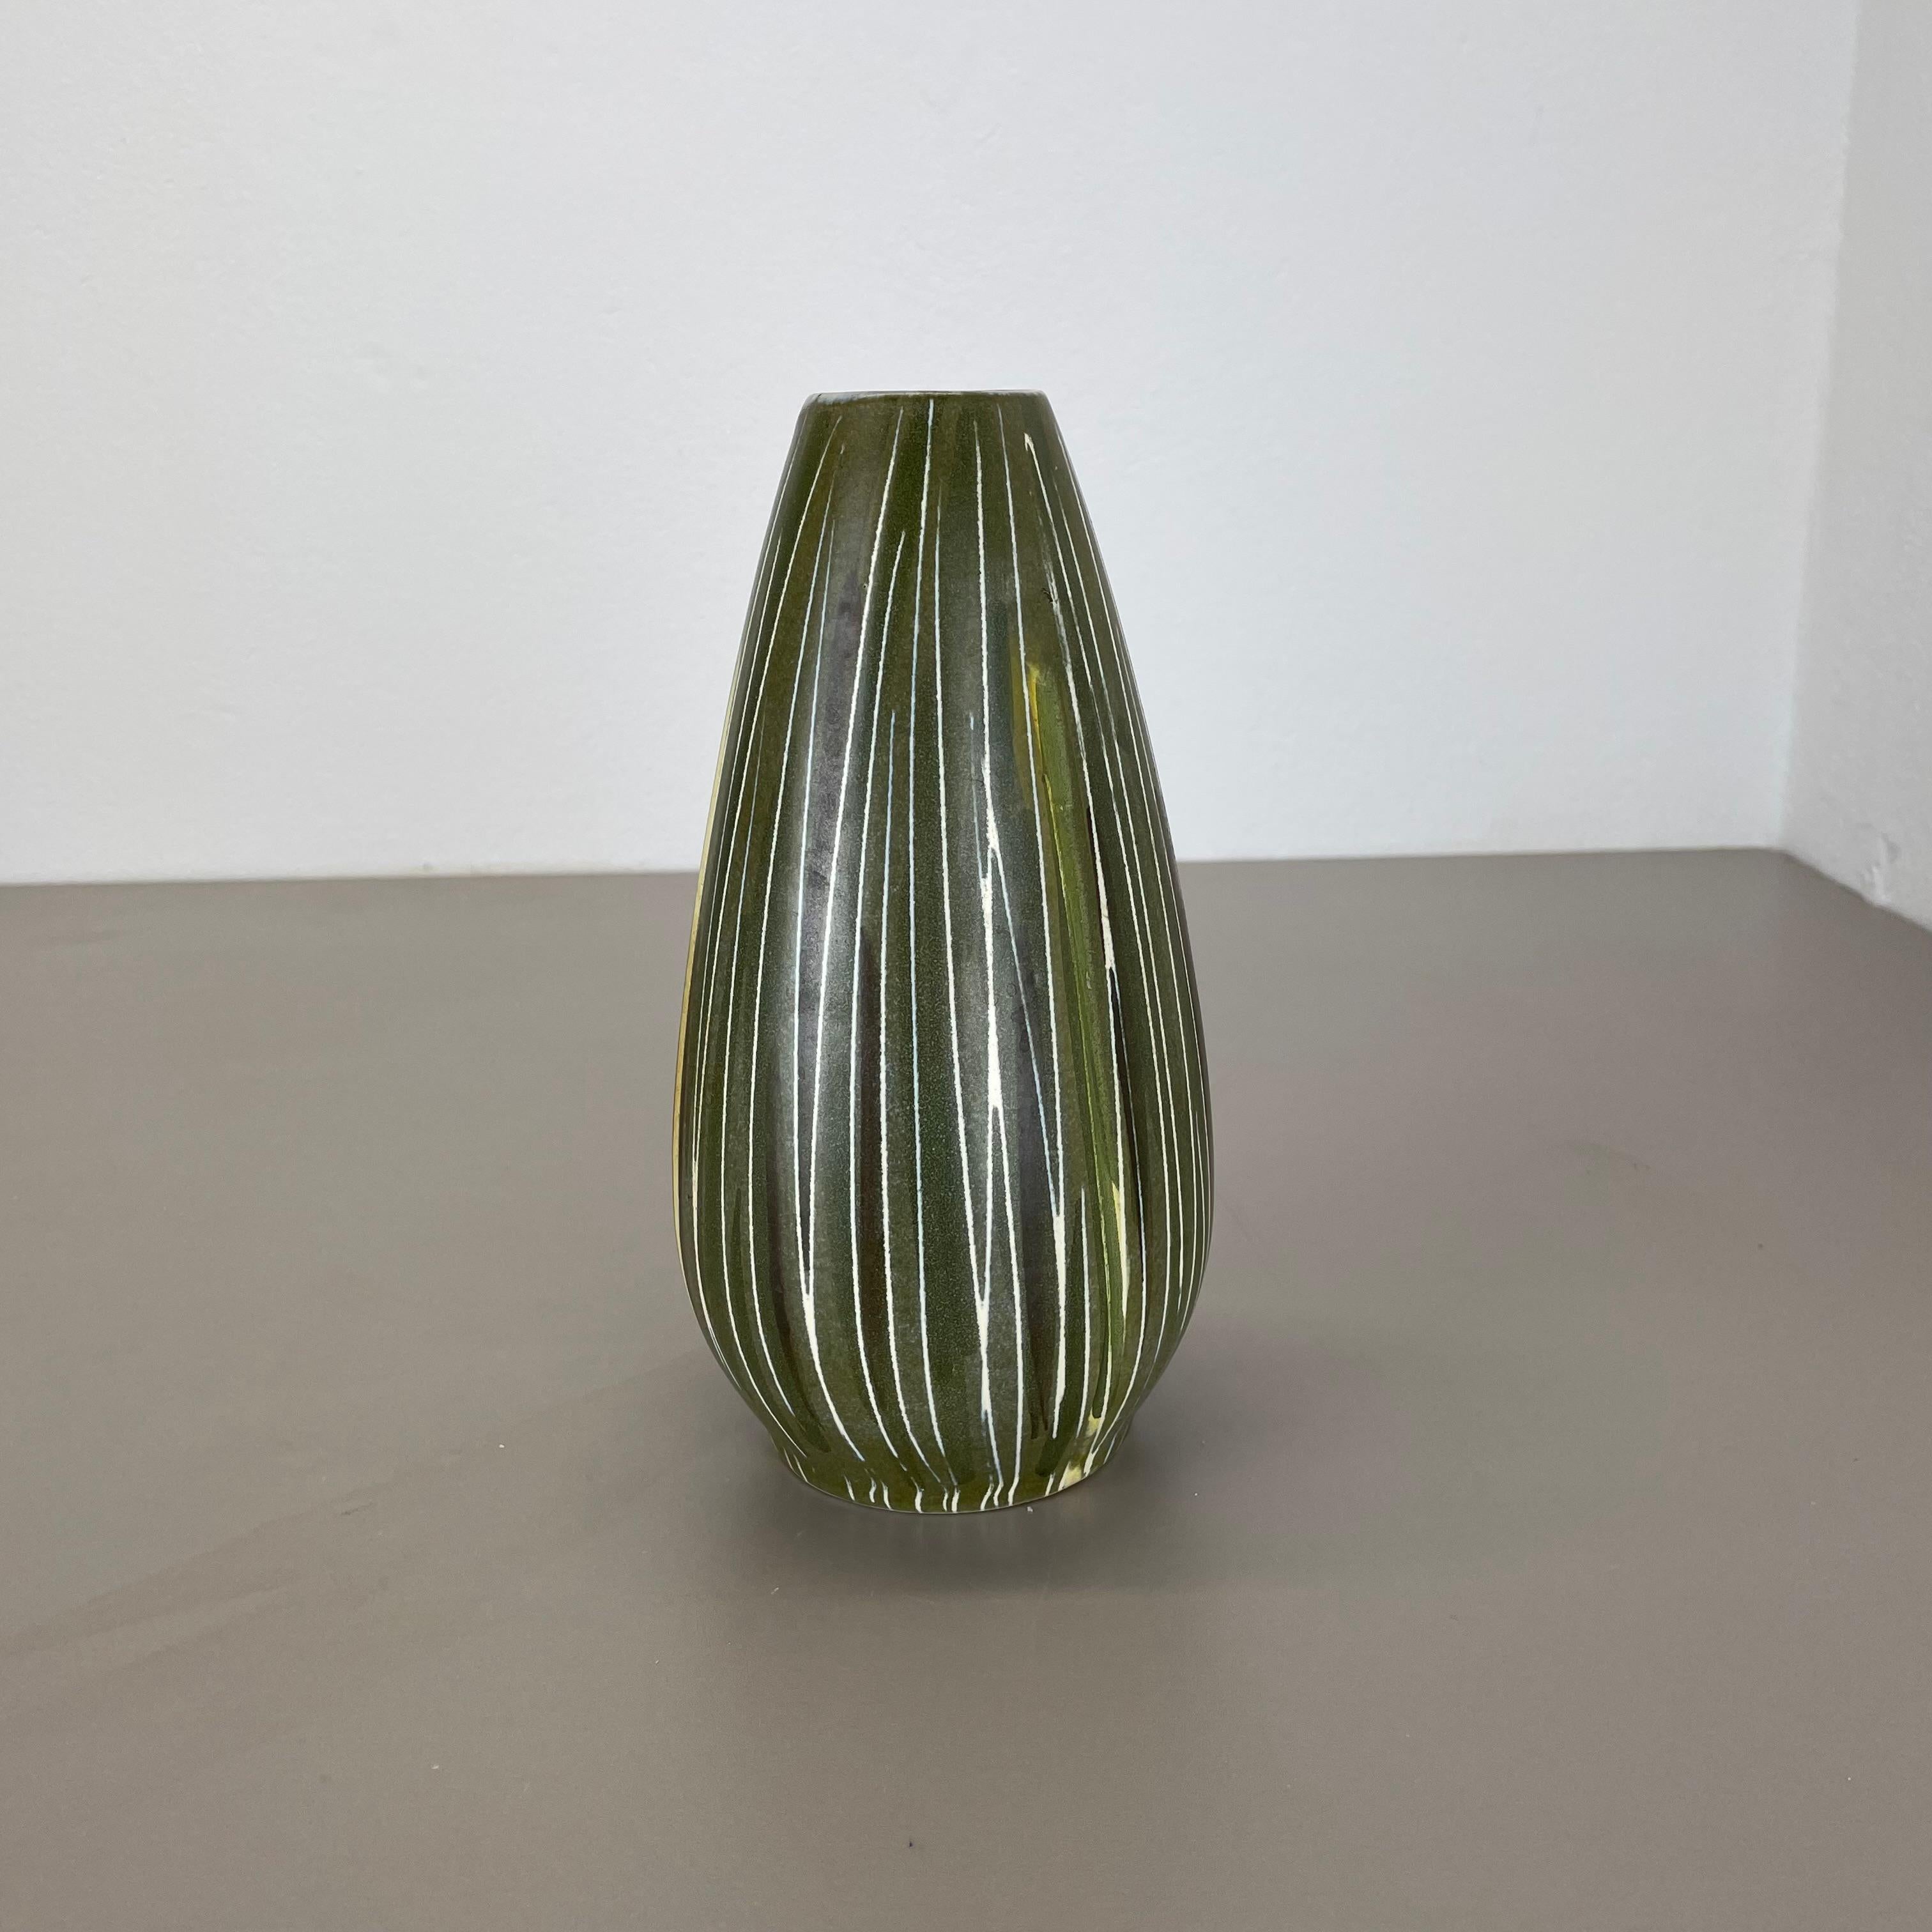 Article:

Ceramic vase


Producer:

Übelacker Ceramics, Germany


Decade:

1970s





This original vintage Pottery vase was  produced in the 1970s by Übelacker Ceramics, Germany. Rare form with a nice abstract illustration in green tones with lines